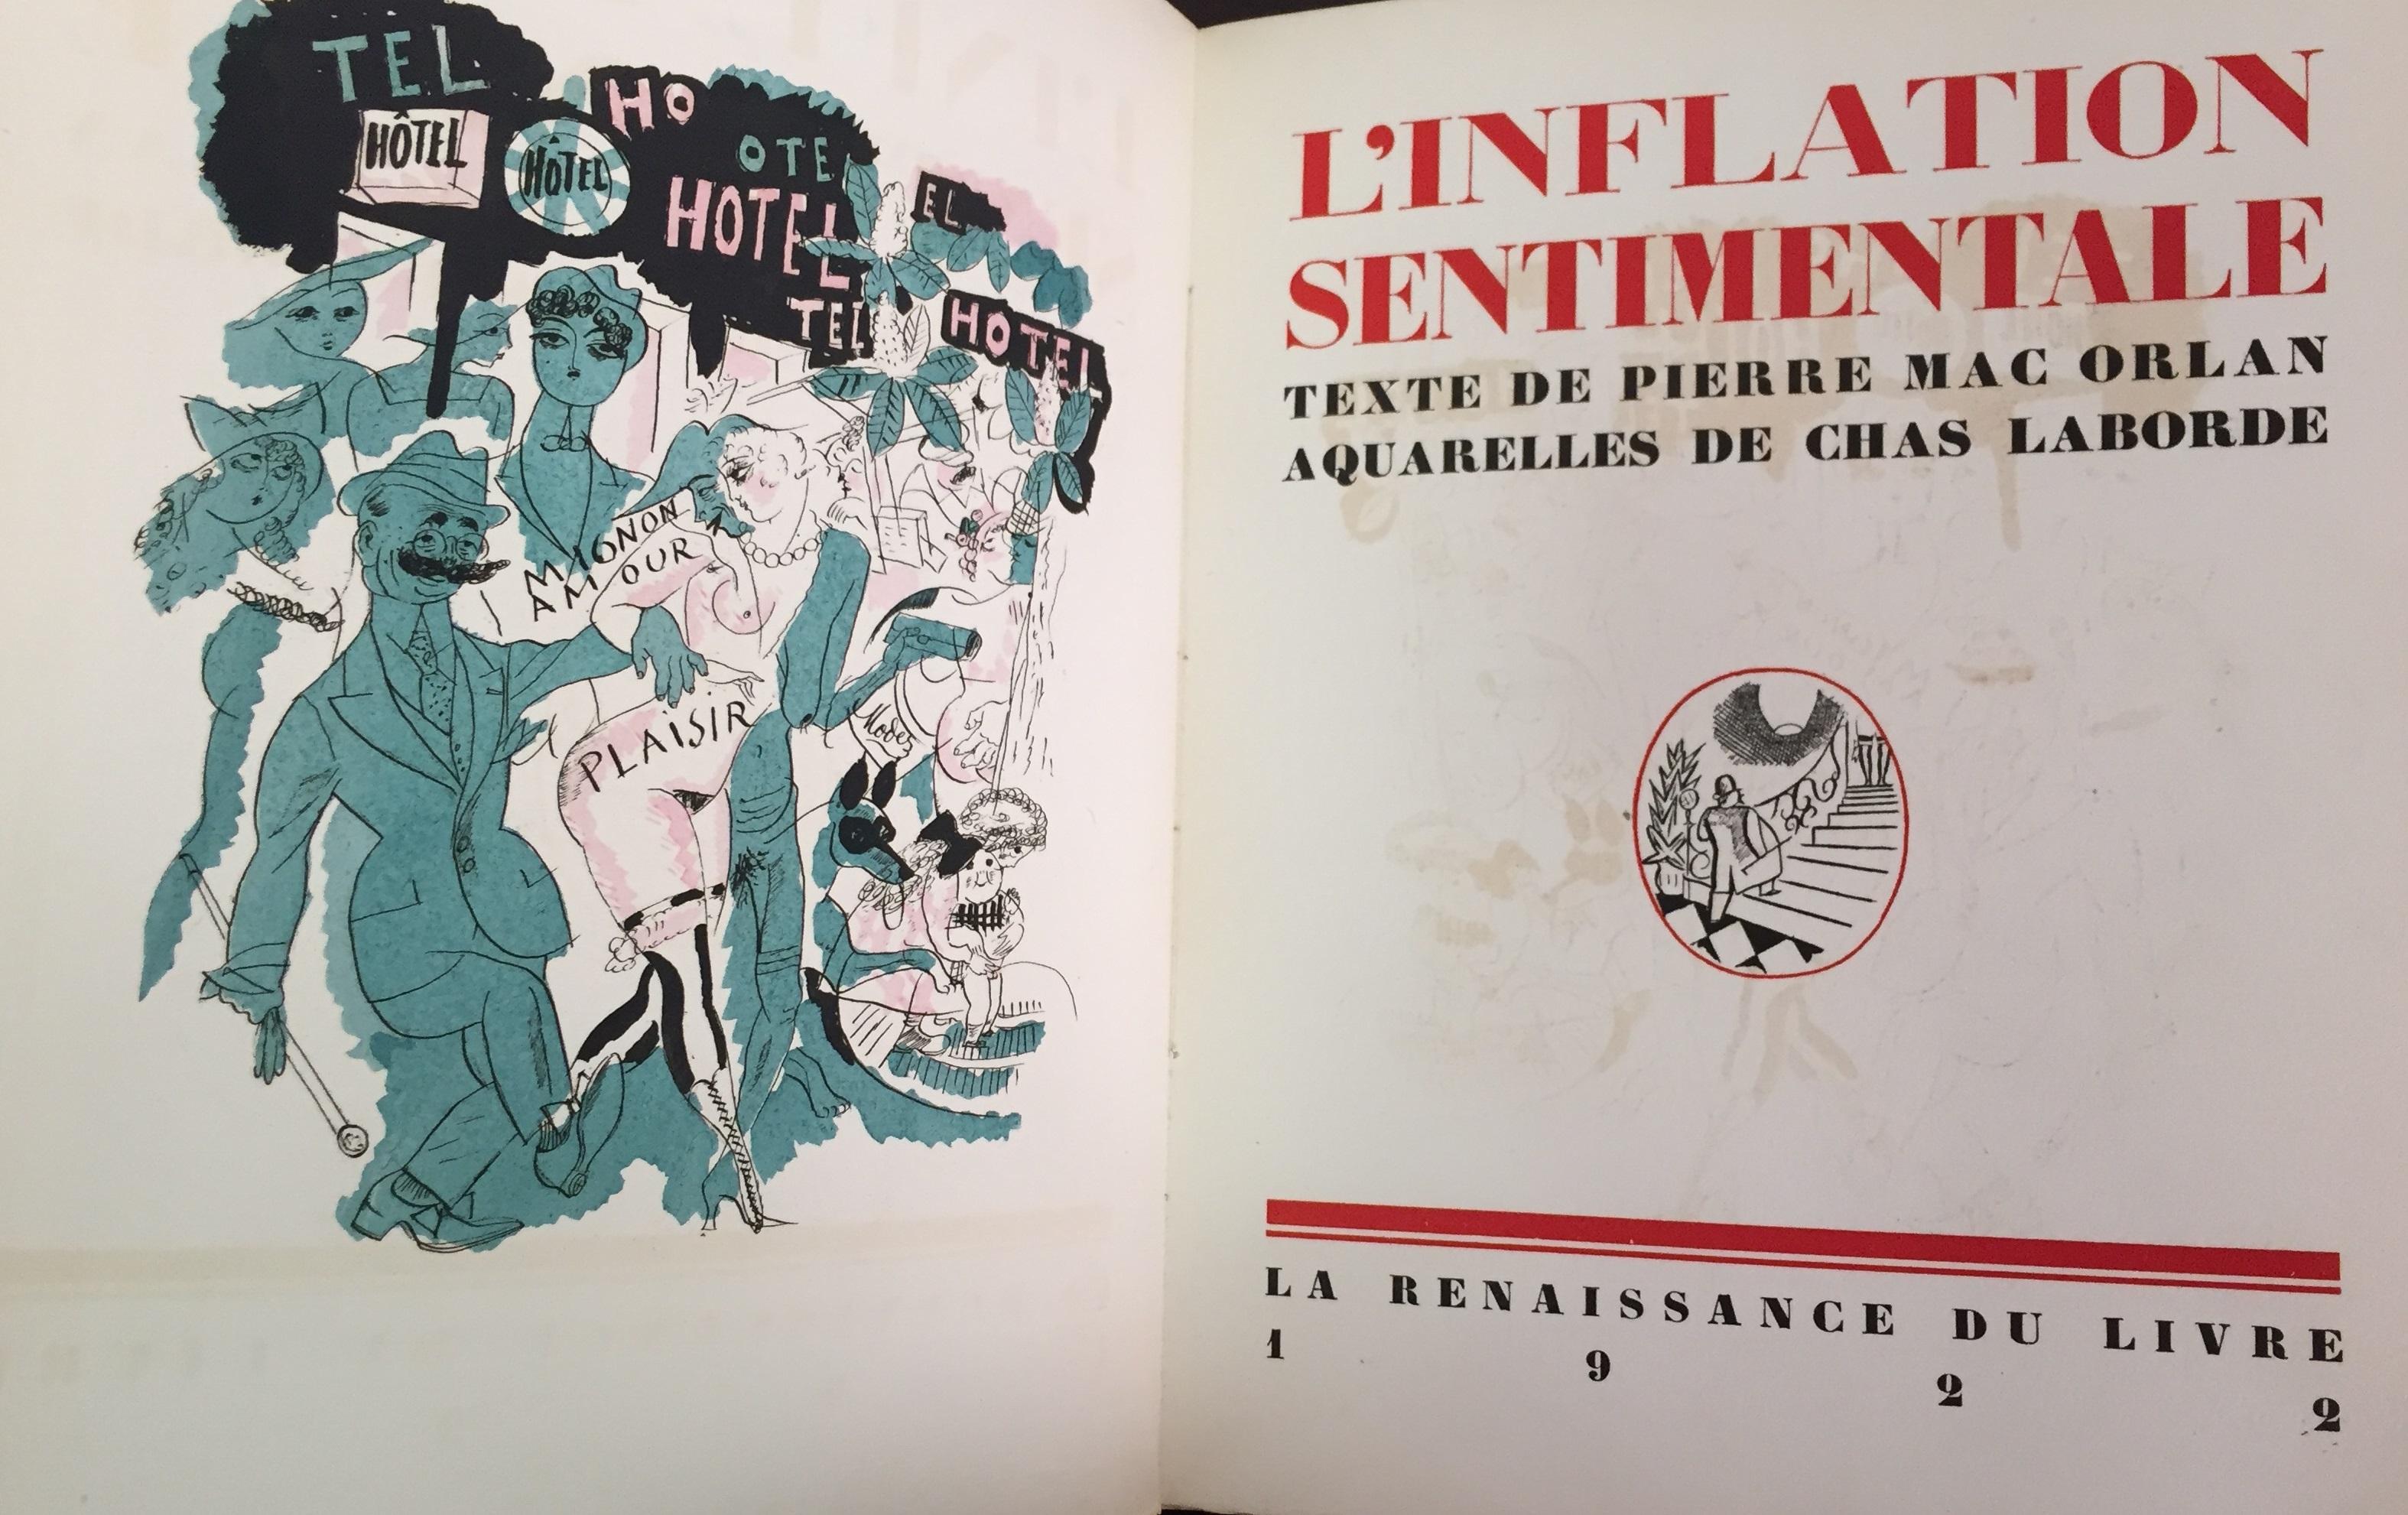 L'Inflation Sentimentale - Rare Book Illustrated by Chasles Laborde - 1923 For Sale 4